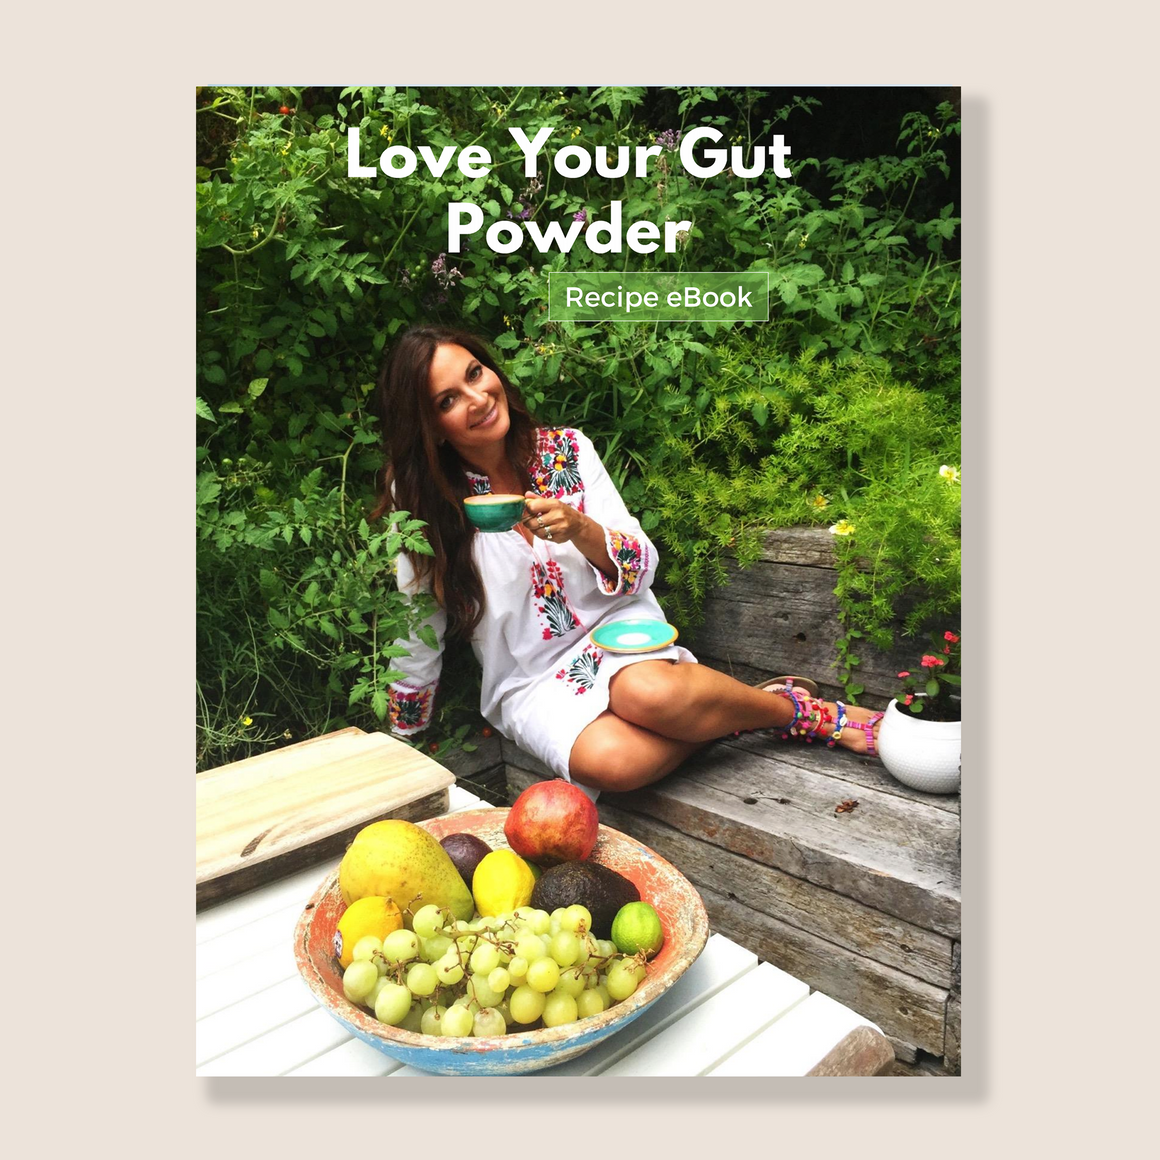 LOVE YOUR GUT POWDER FREE eBOOK BY LEE HOLMES